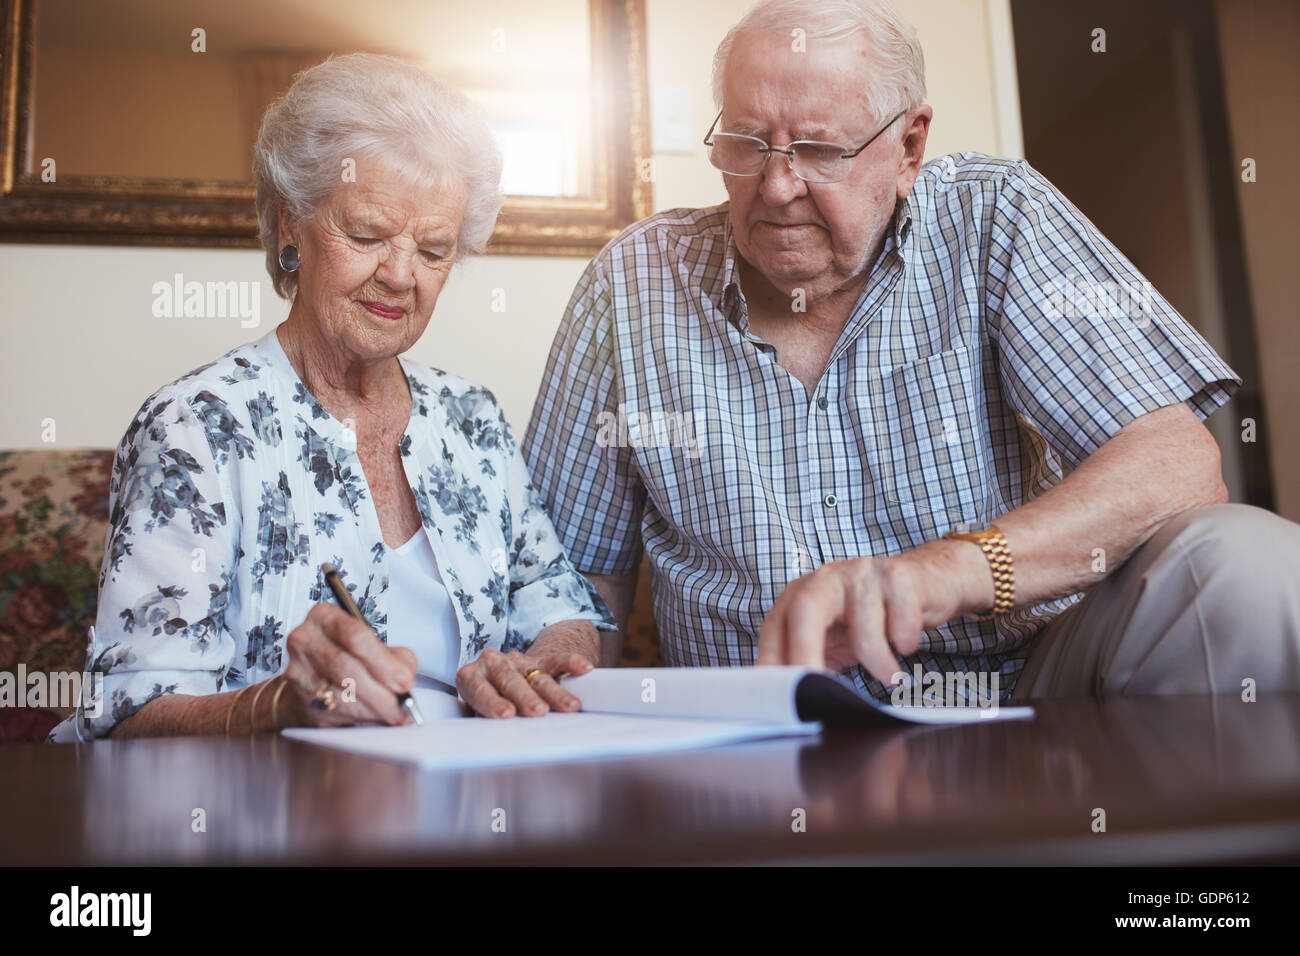 Indoor shot of mature couple at home signing documents together. Senior man and woman sitting on sofa doing retirement paperwork Stock Photo